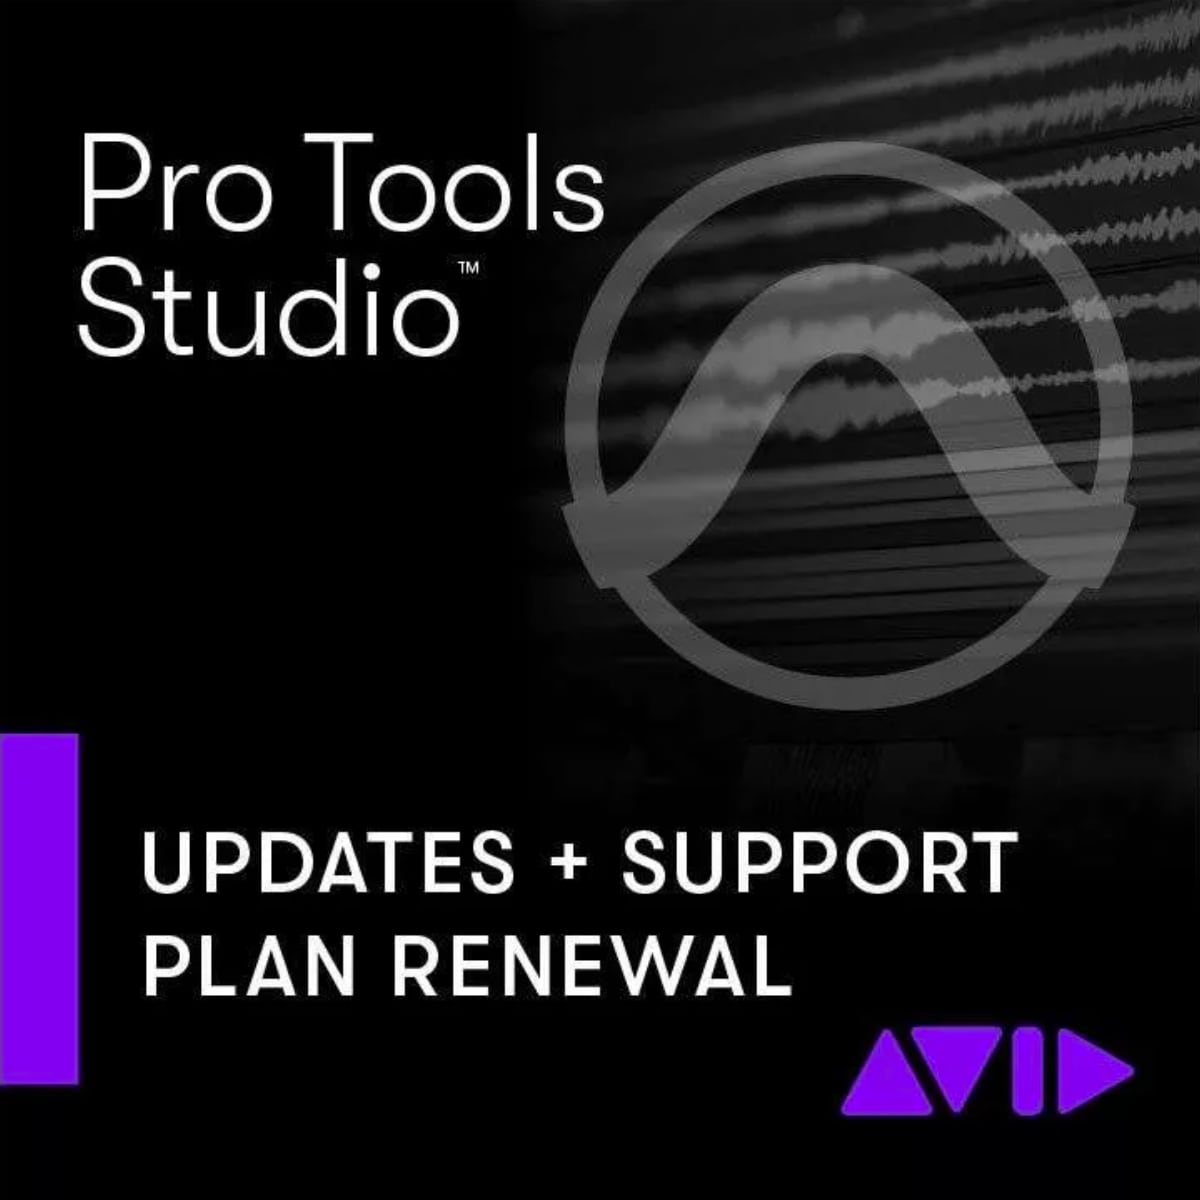 Protools Studio Update and support plan renewal